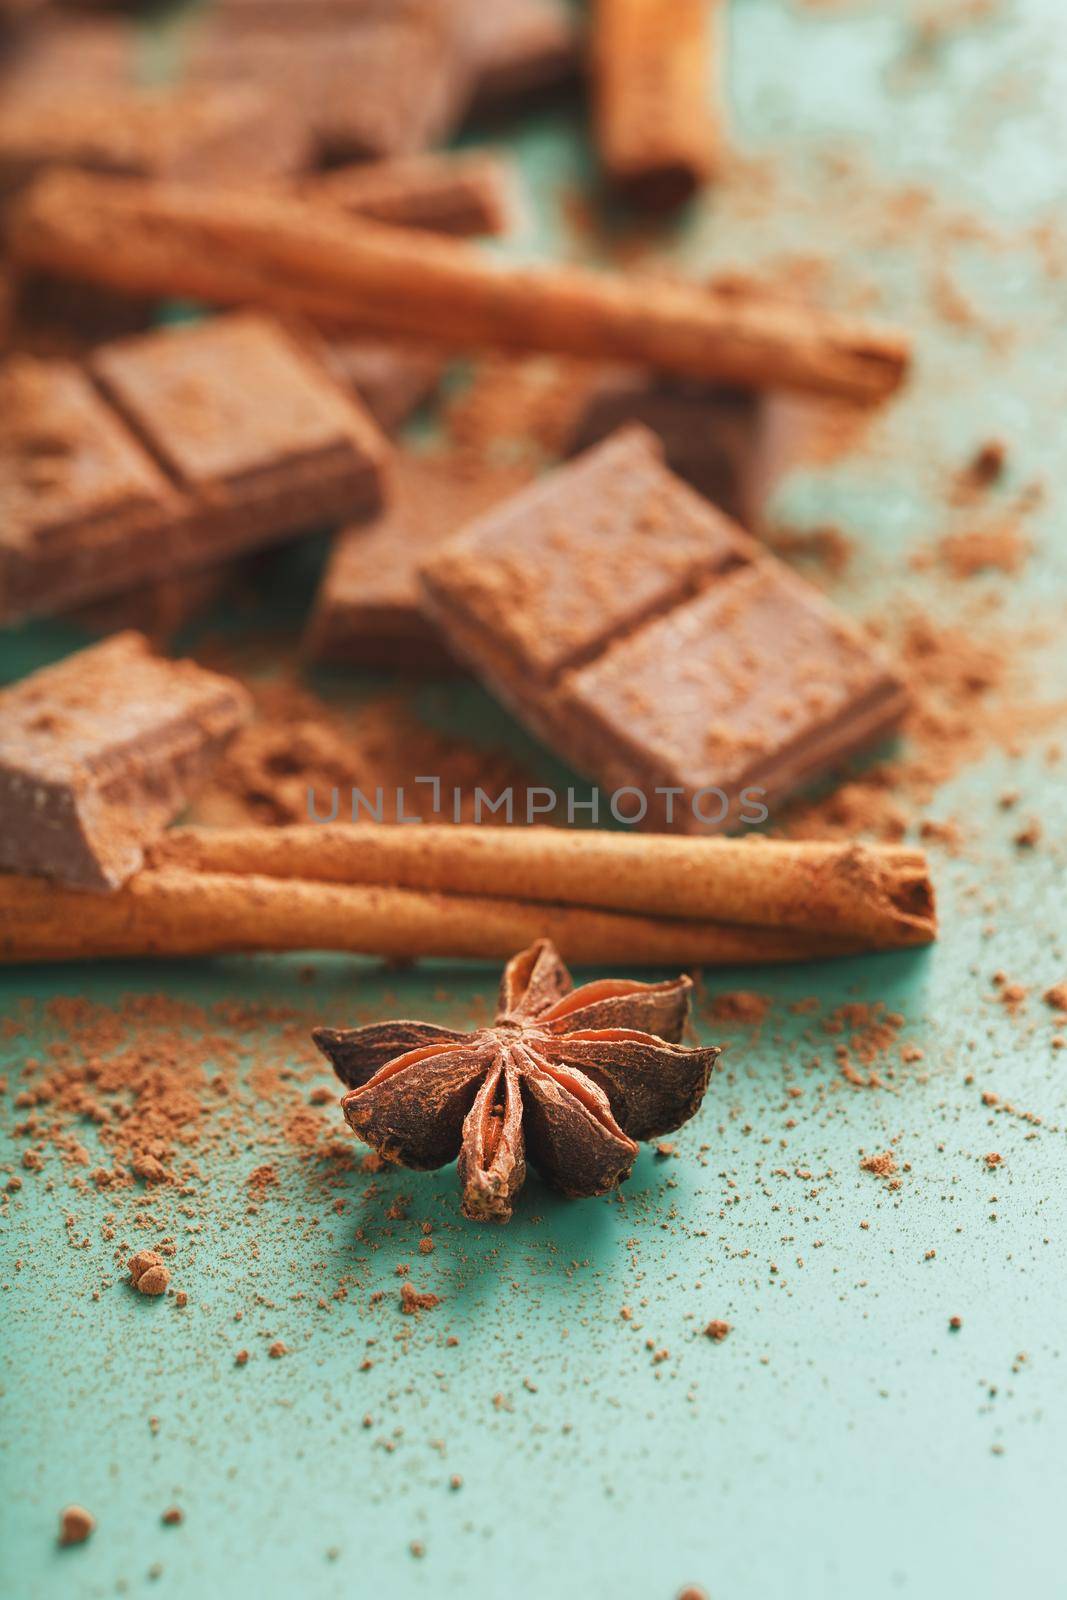 Chocolate broken into slices with cocoa powder and spices on a green background. Close-up